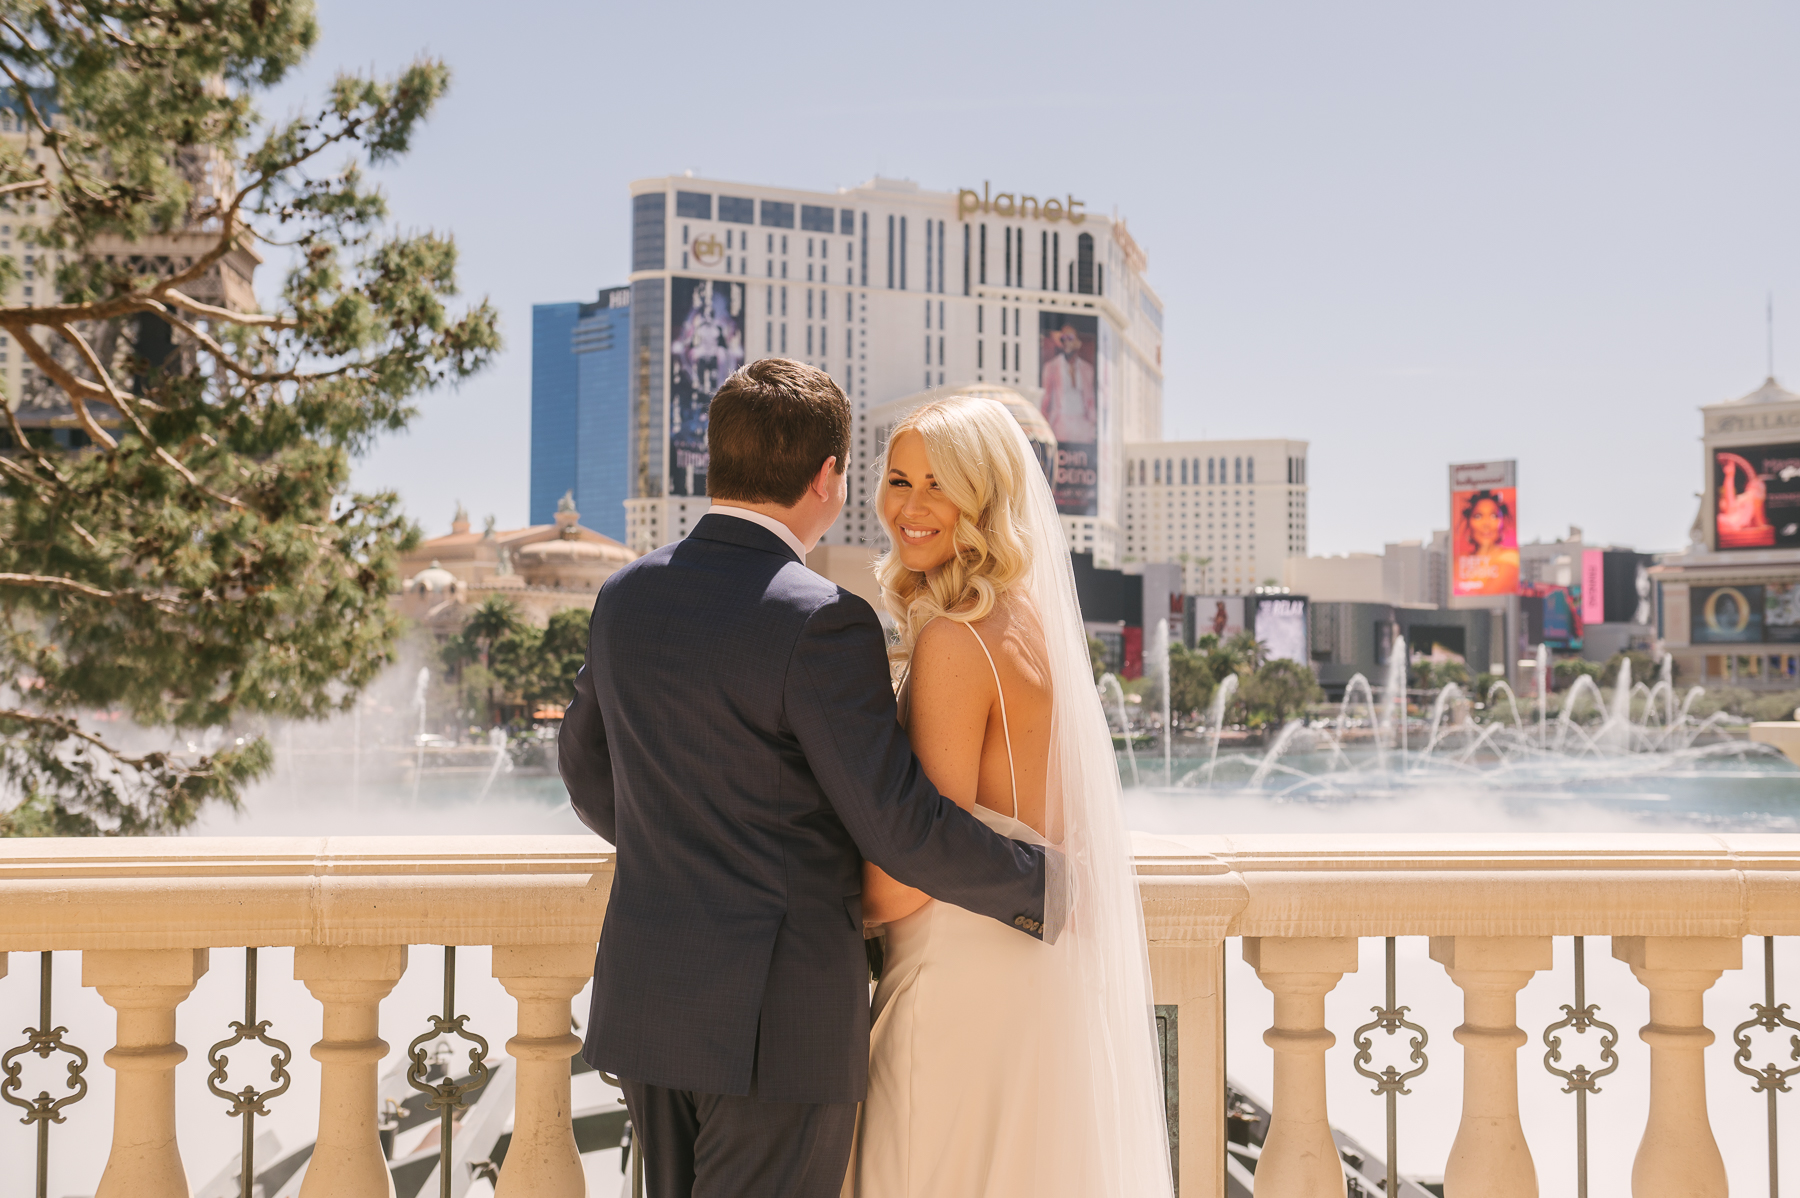 Bride smiling back at camera as groom wraps his arm around her at The Bellagio in Las Vegas